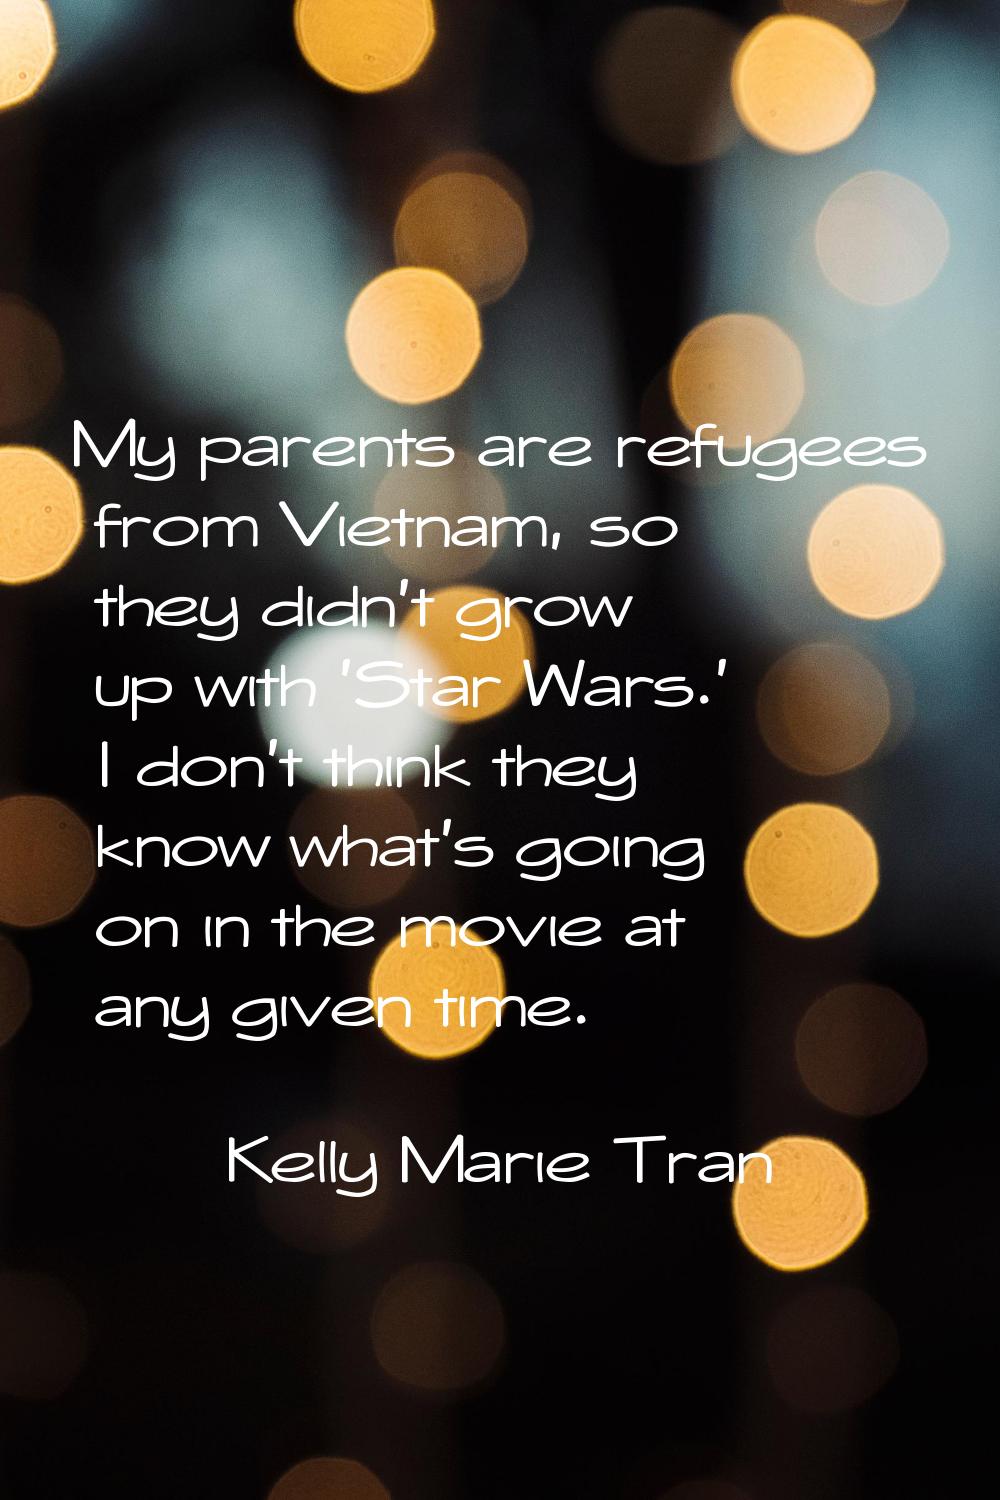 My parents are refugees from Vietnam, so they didn't grow up with 'Star Wars.' I don't think they k